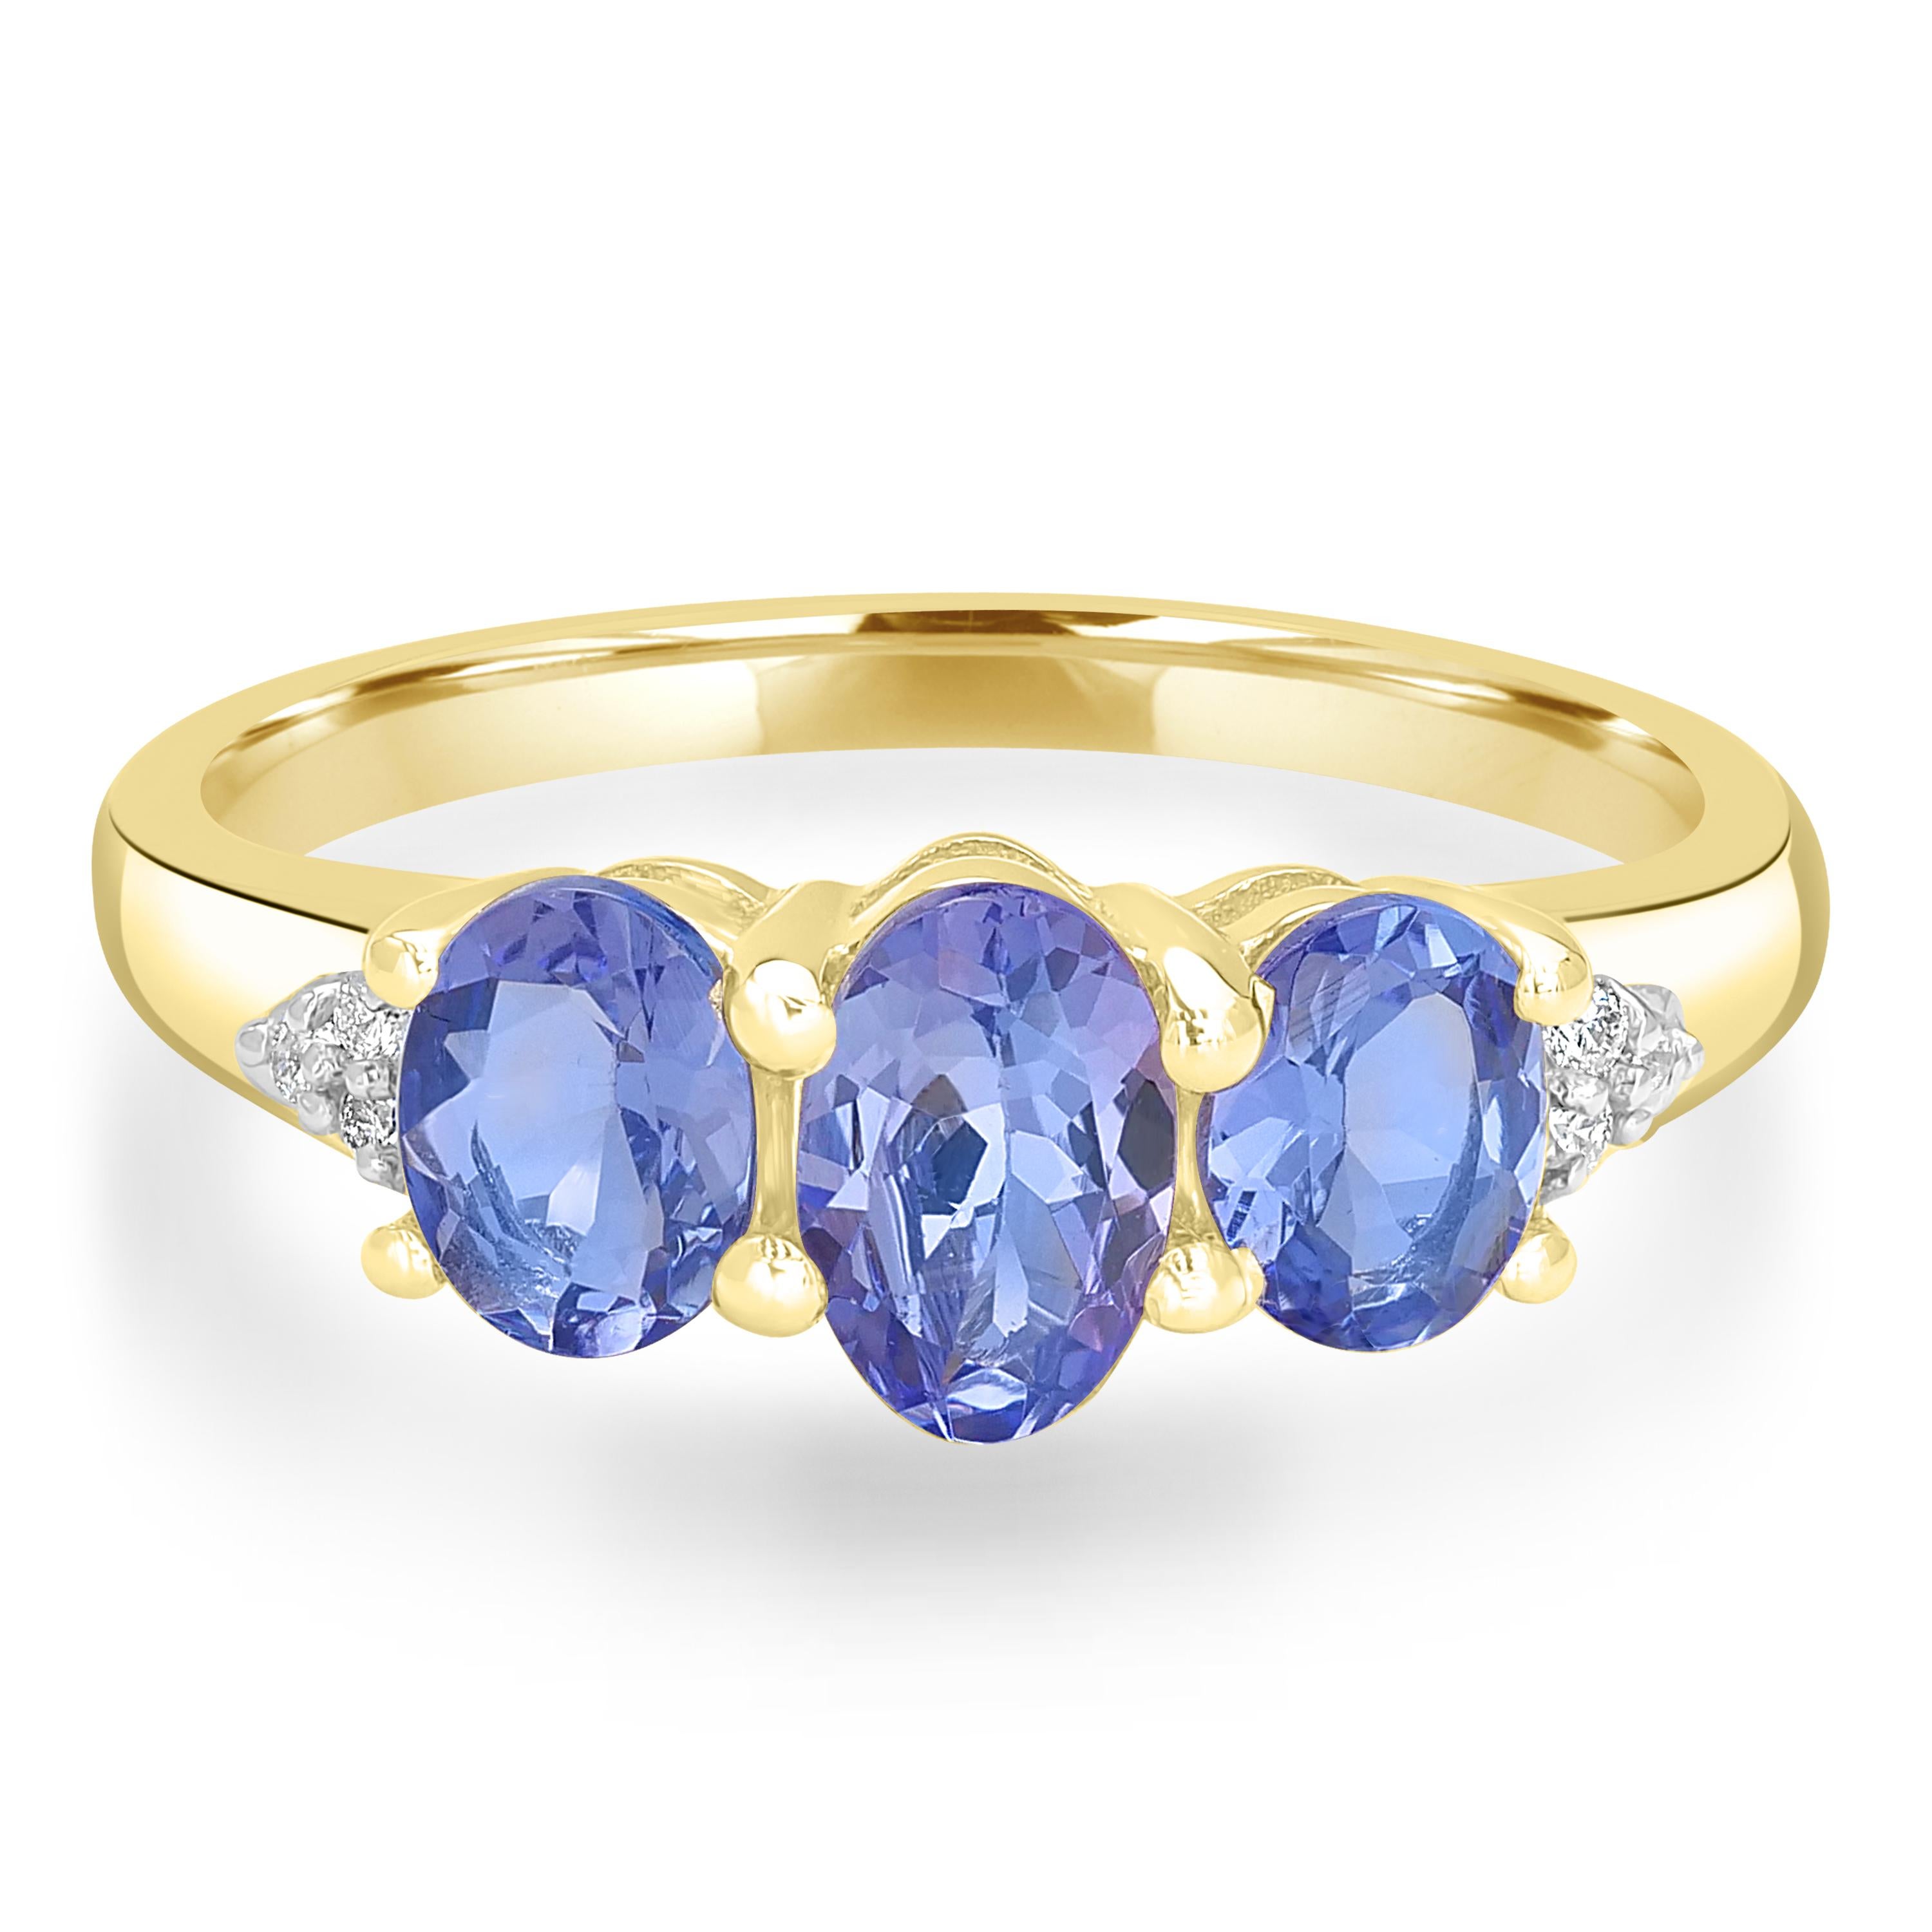 Beaming a bold color, this Gemistry gorgeous oval tanzanite three-stone ring is sure to be a showstopper. Three oval-cut, prong-set 1.14-carat Tanzanite at the center with round-cut, prong-set white diamond accents mounted on polished 14k gold make